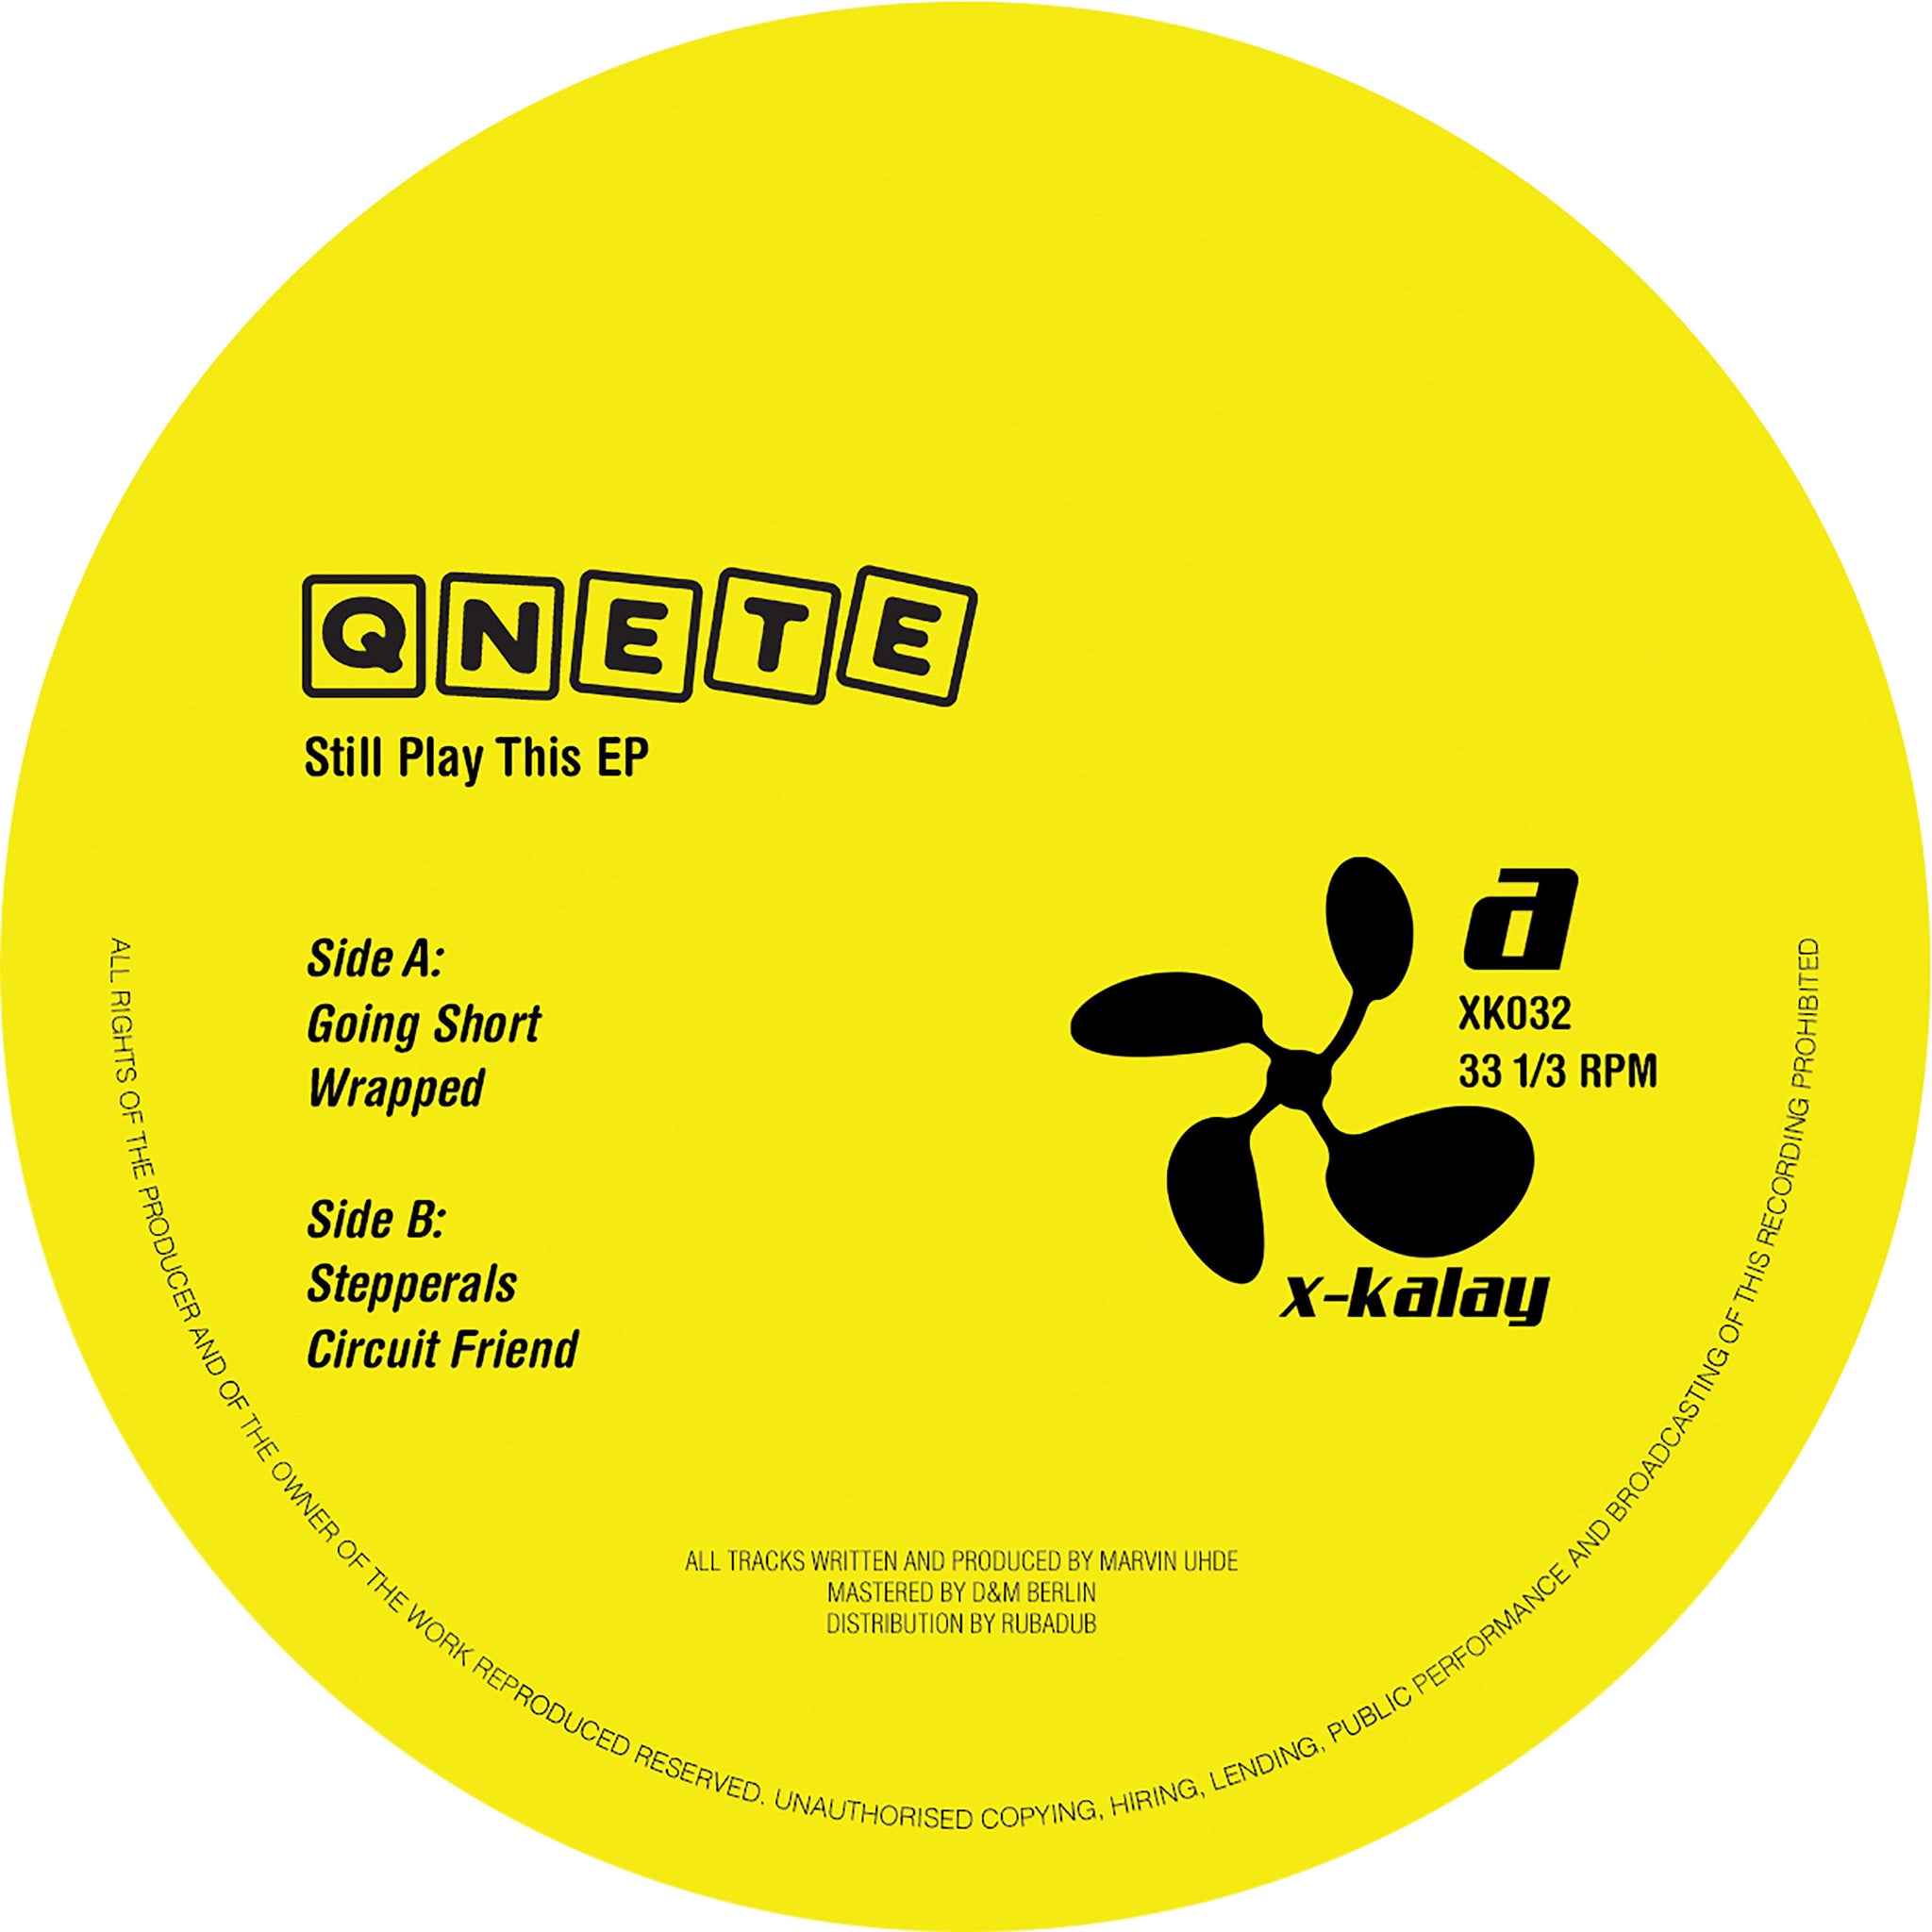 Qnete - Still Play This EP